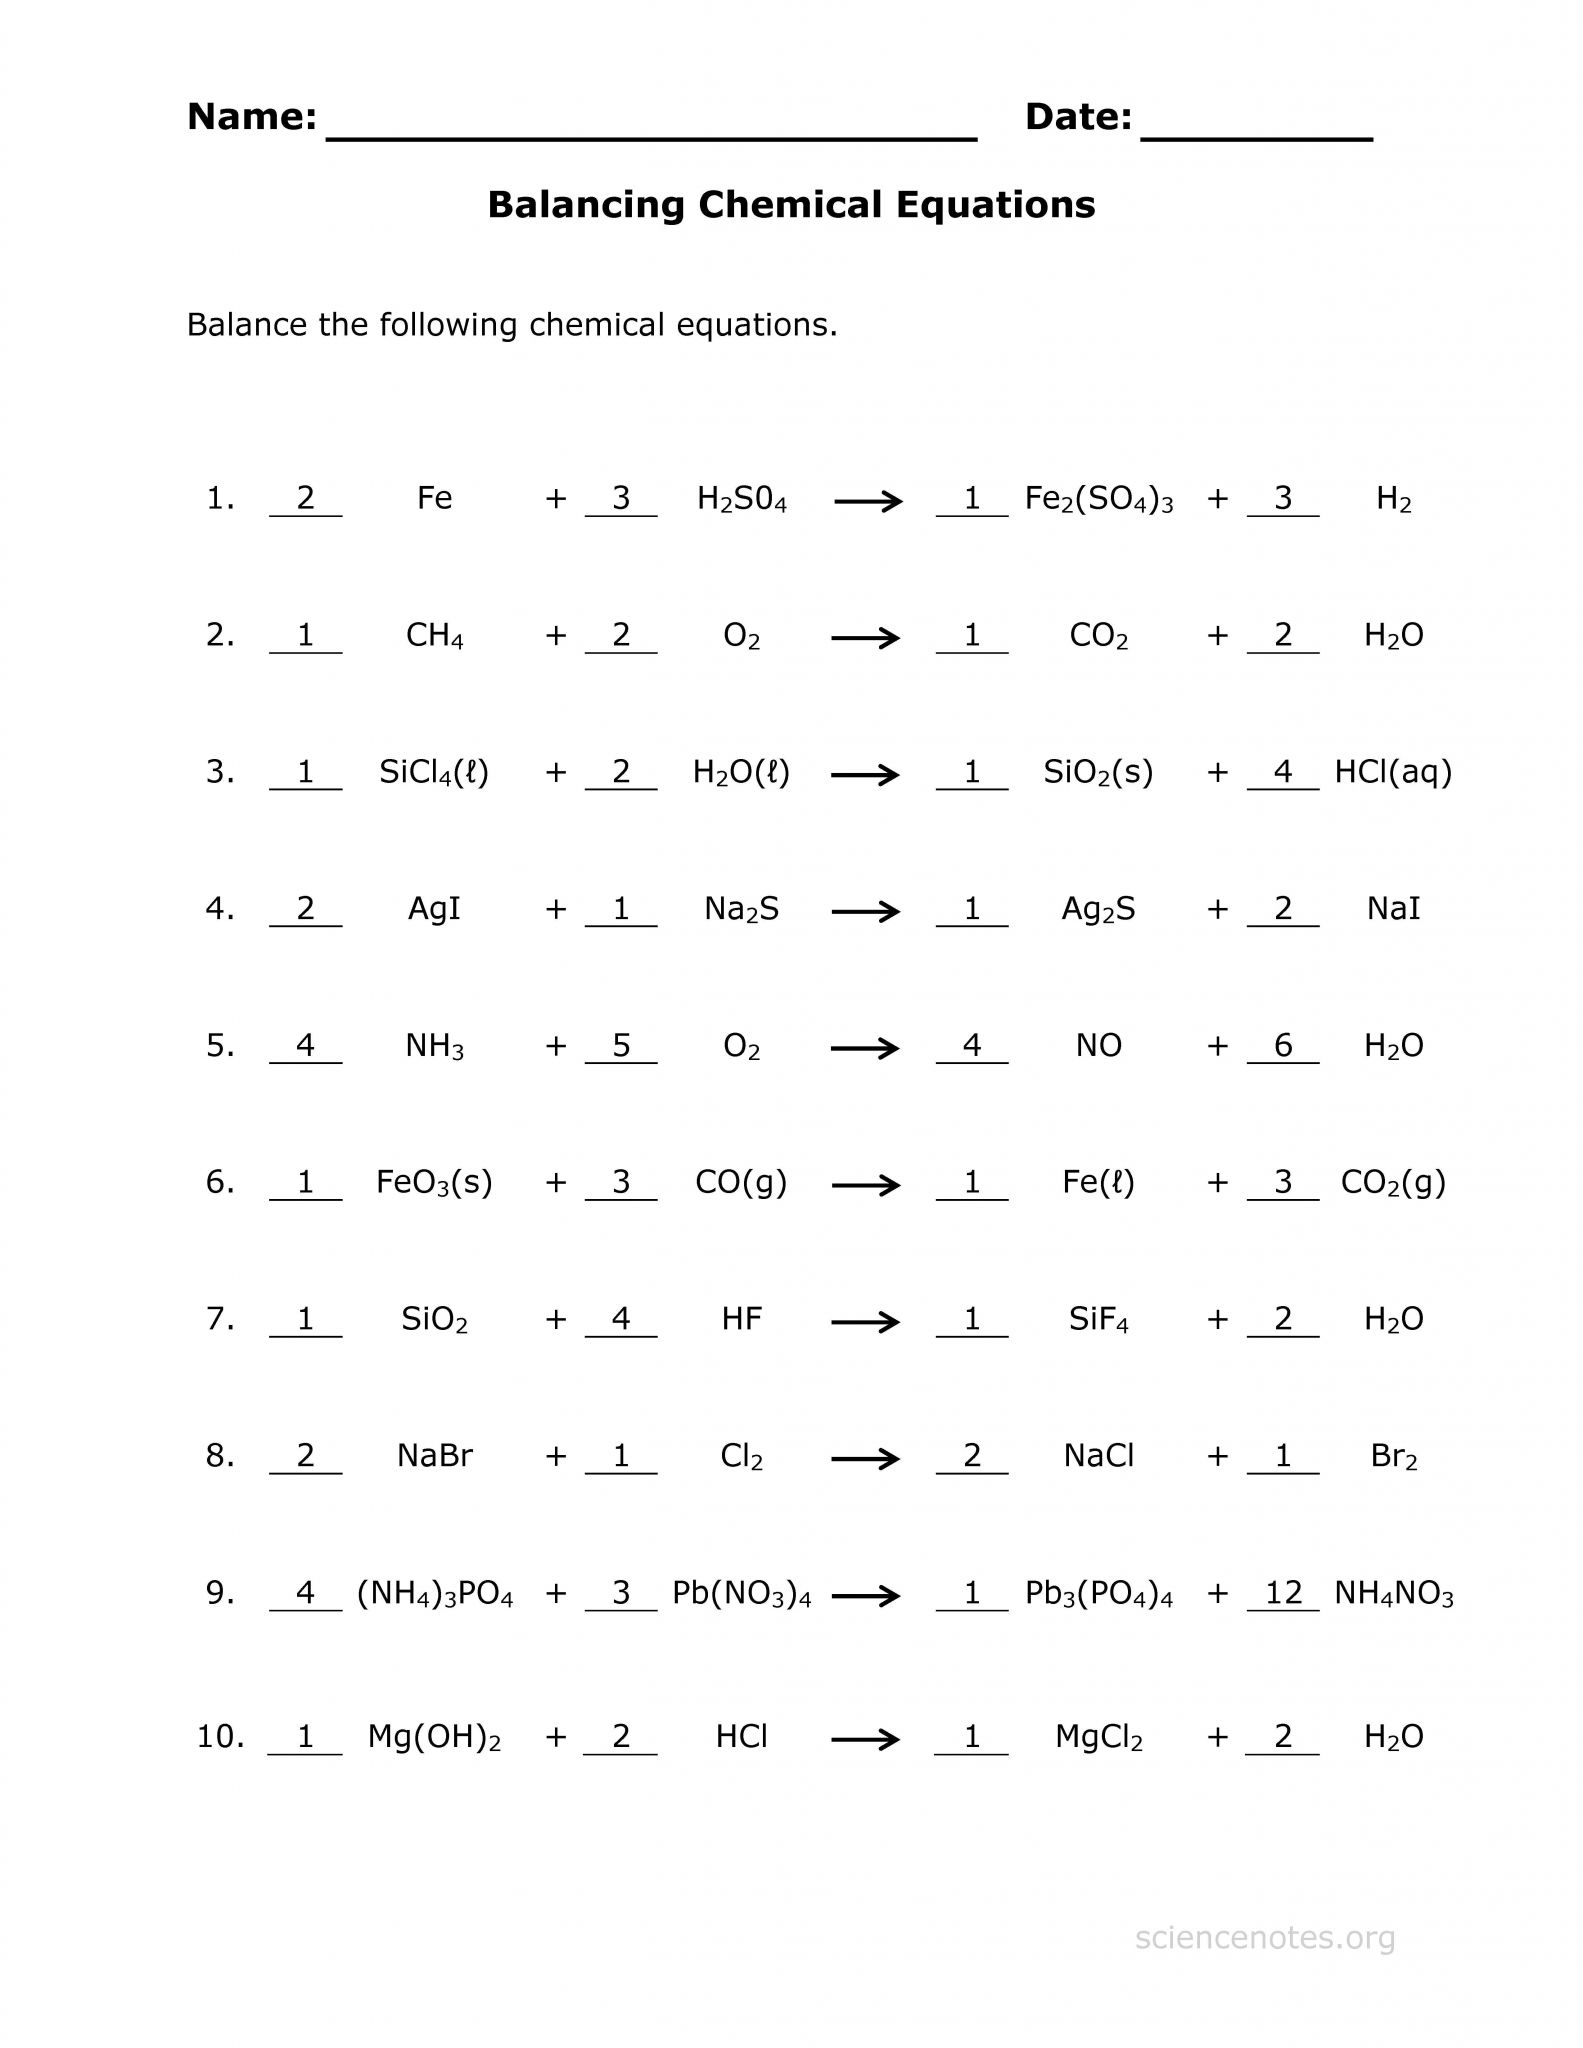 Introduction to Periodic Table Lab Activity Worksheet Answer Key Also Answer Key for the Balance Chemical Equations Worksheet